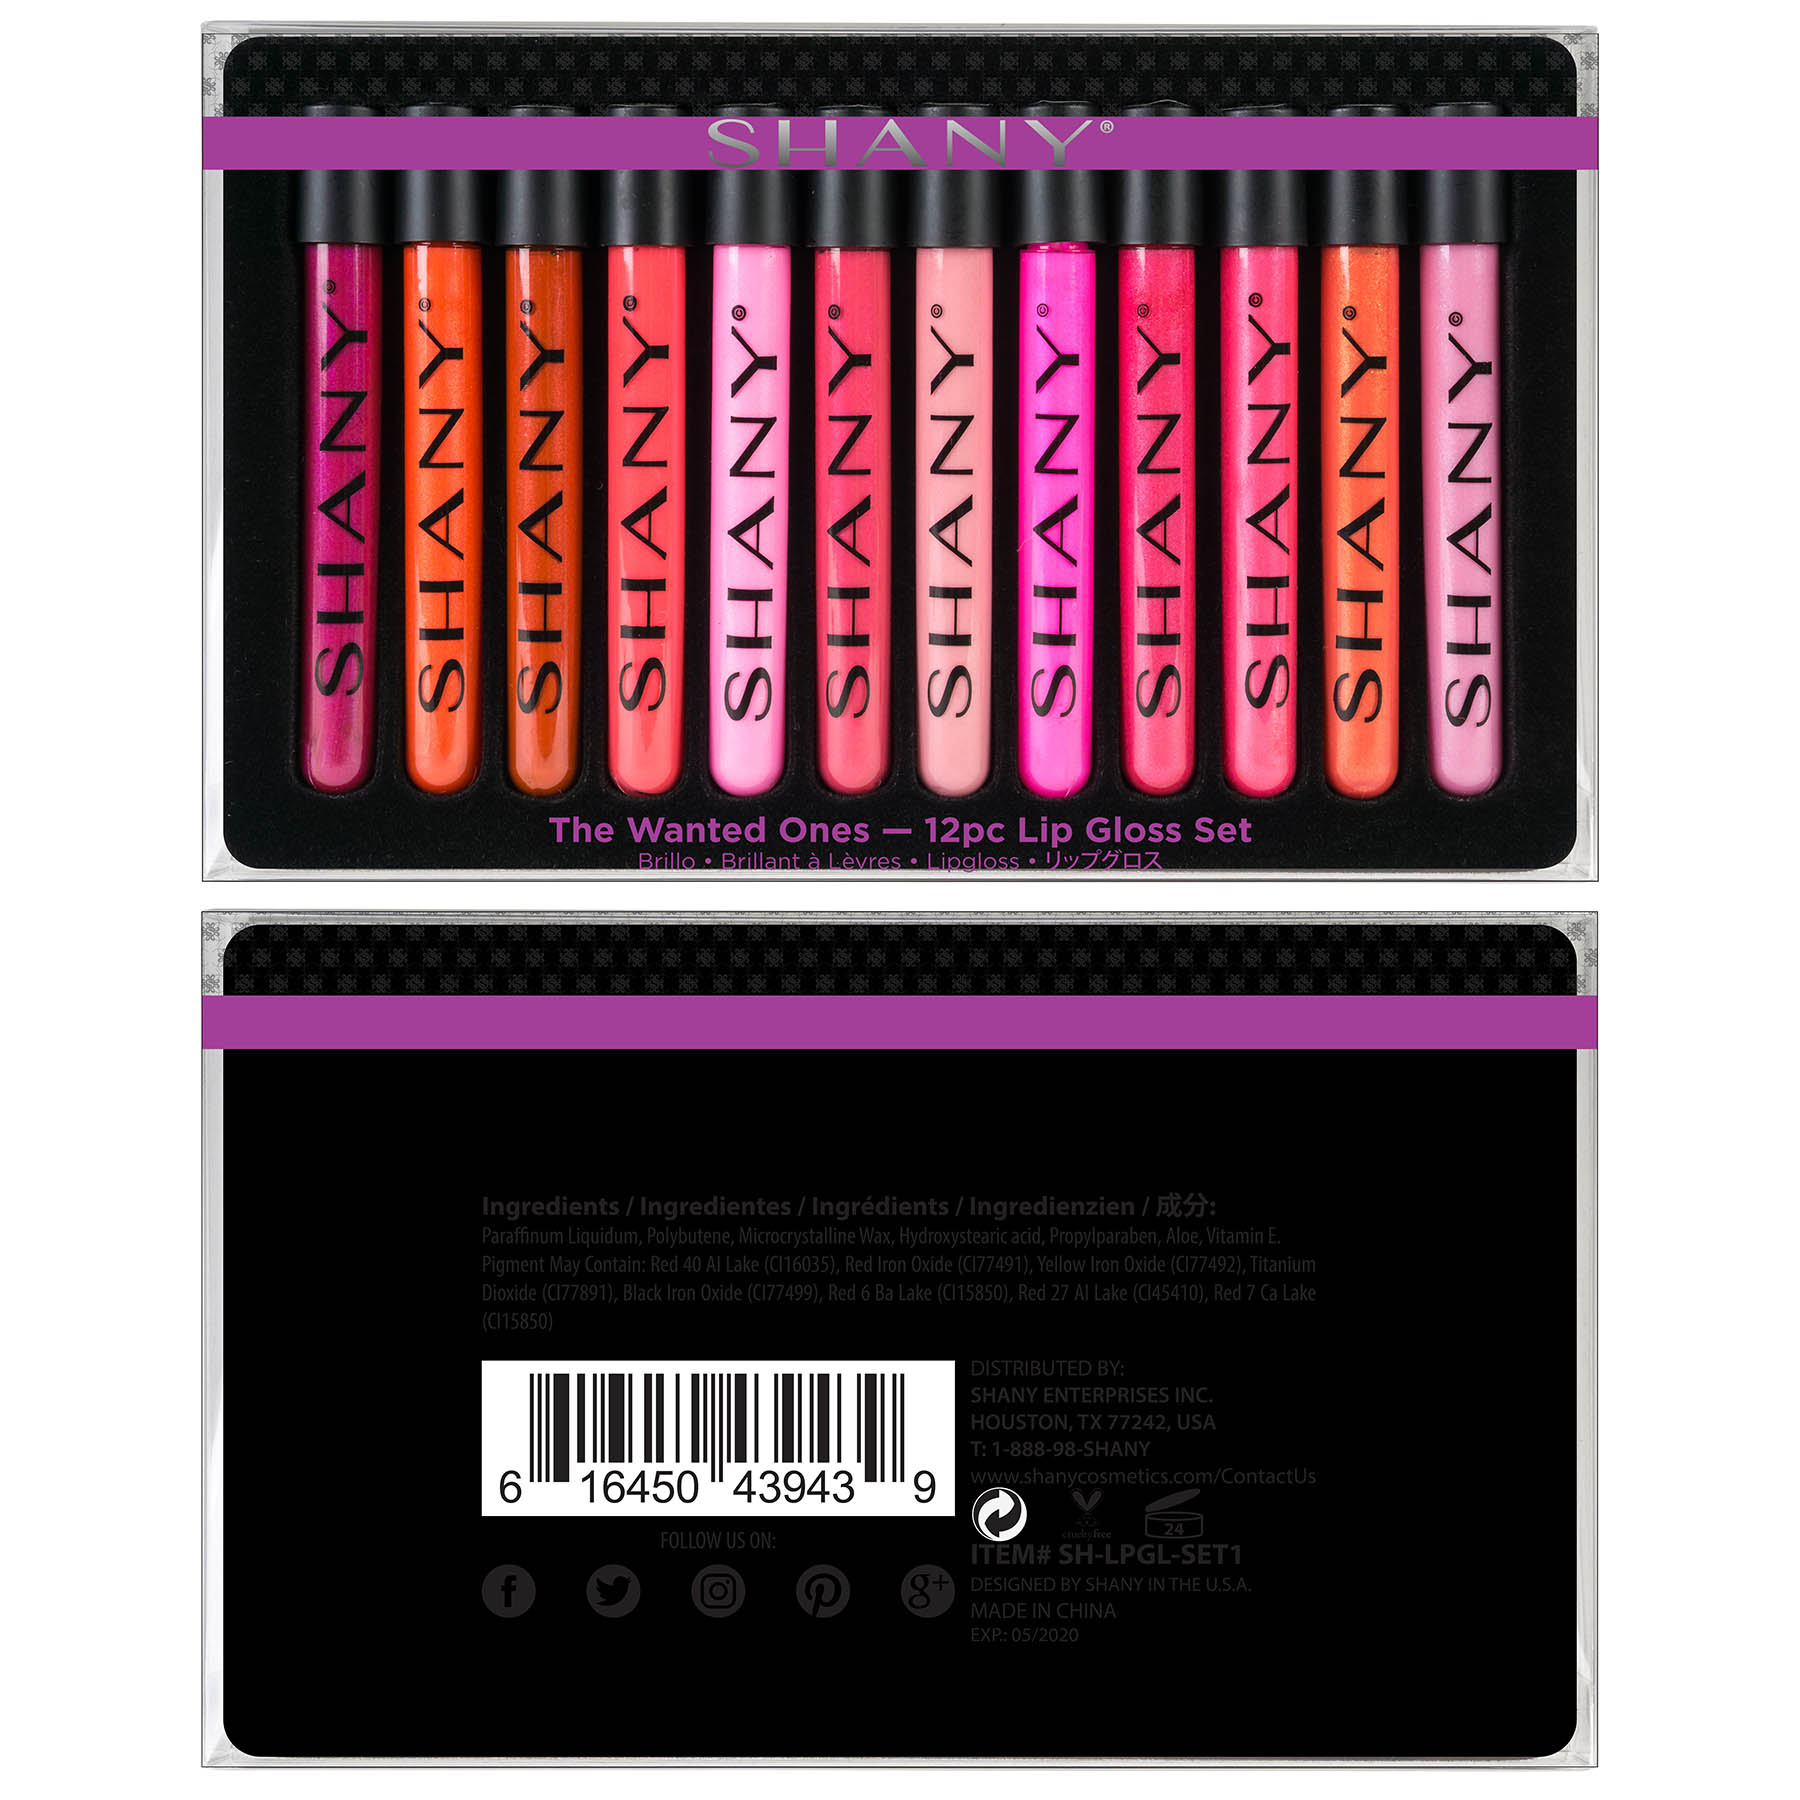 SHANY The Wanted Ones - 12 Piece Lip Gloss Set with Aloe Vera and Vitamin E - image 3 of 5